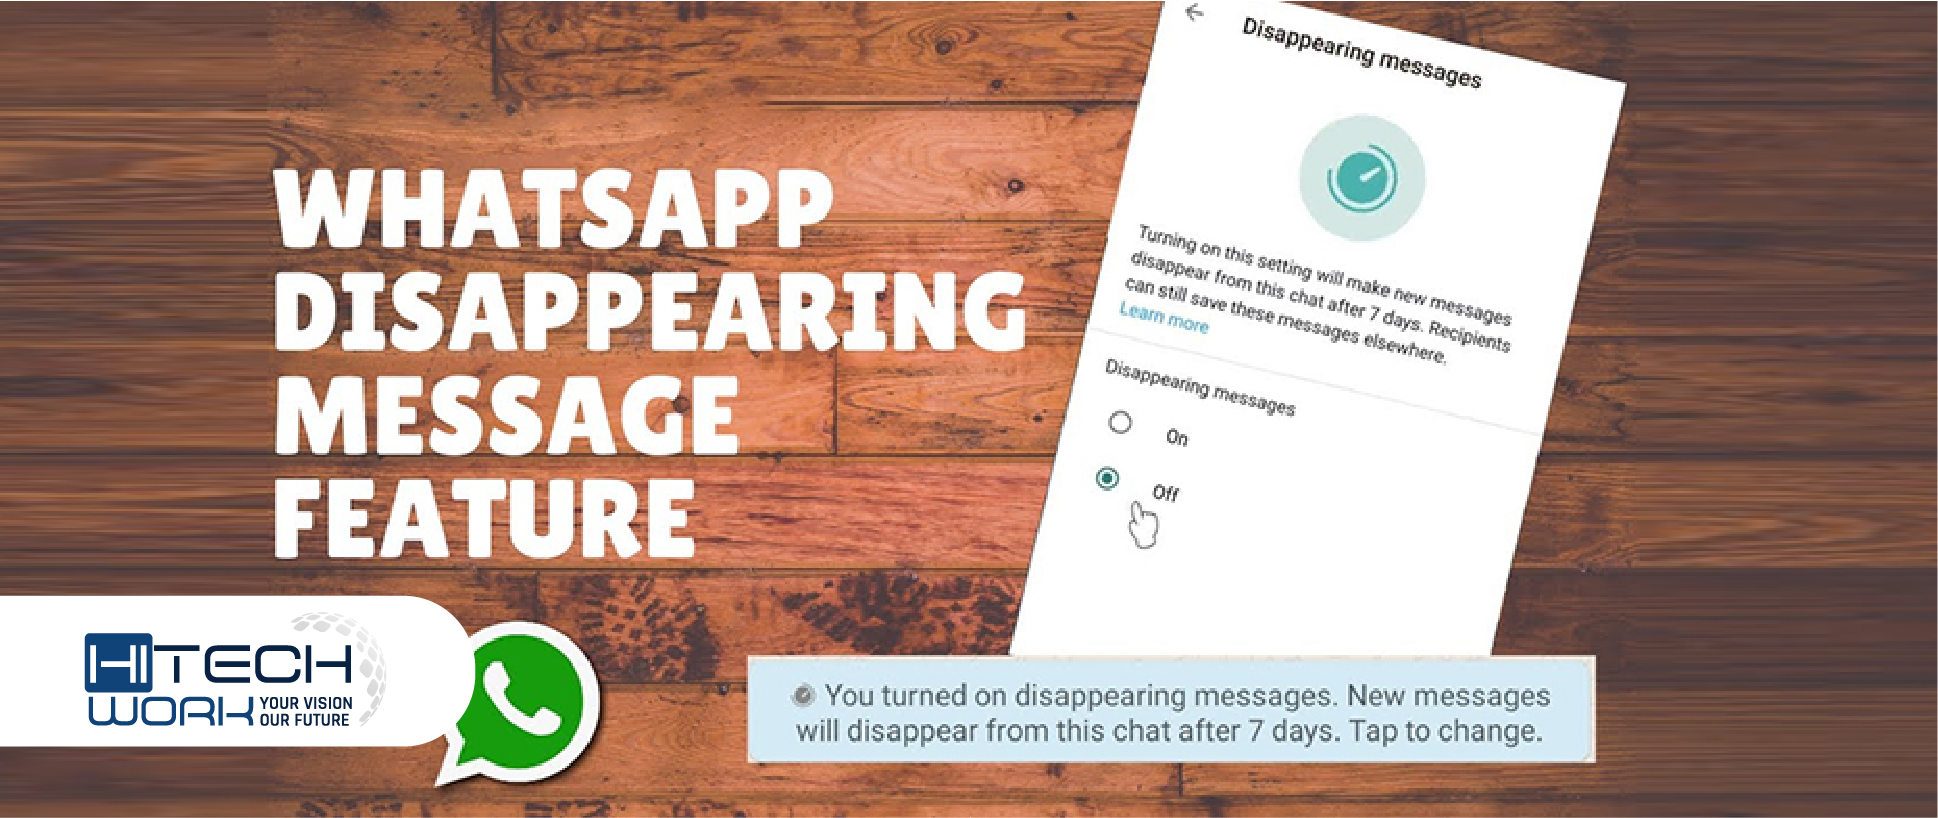 Meta Owned WhatsApp Disappearing Messages Feature